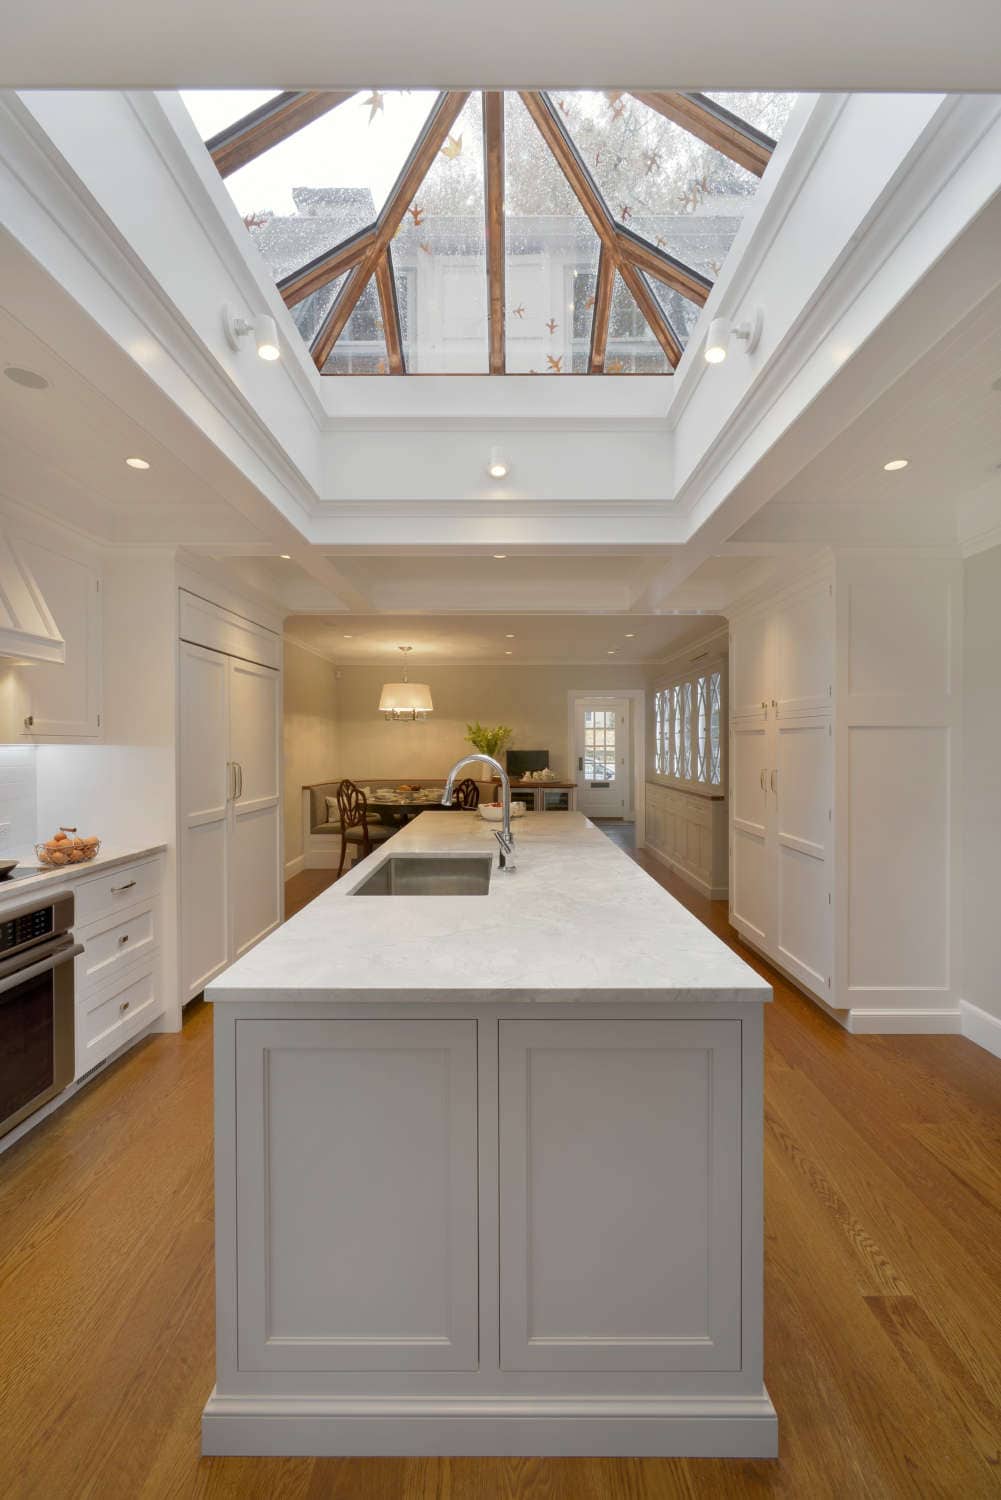 Elegant kitchen features Rutt cabinetry and center island, quartz countertops and pyramid skylight.